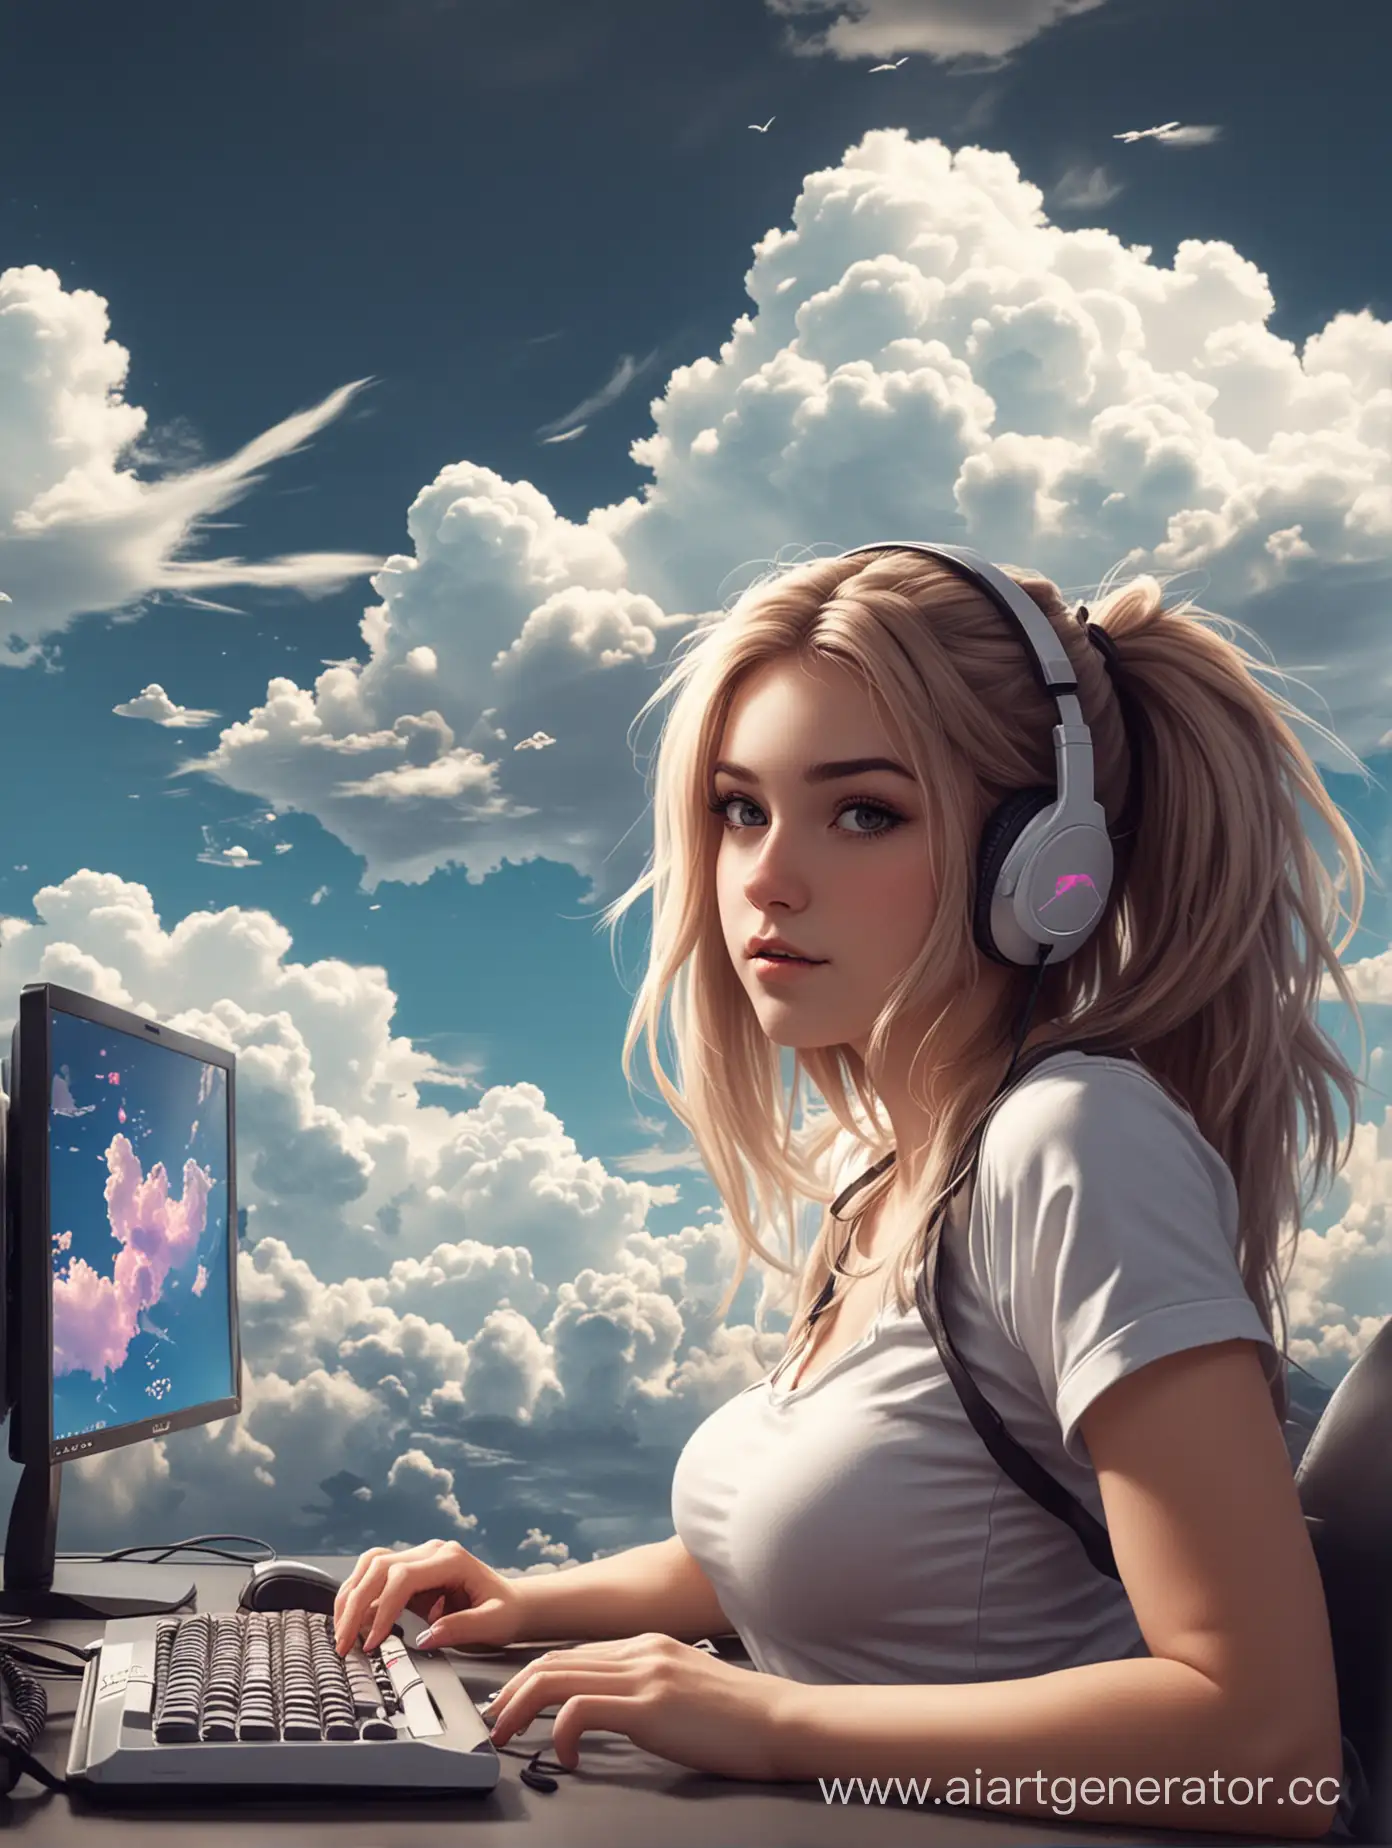 Gamer-Girl-with-Desktop-Clouds-Futuristic-Gaming-Setup-and-Dreamy-Atmosphere